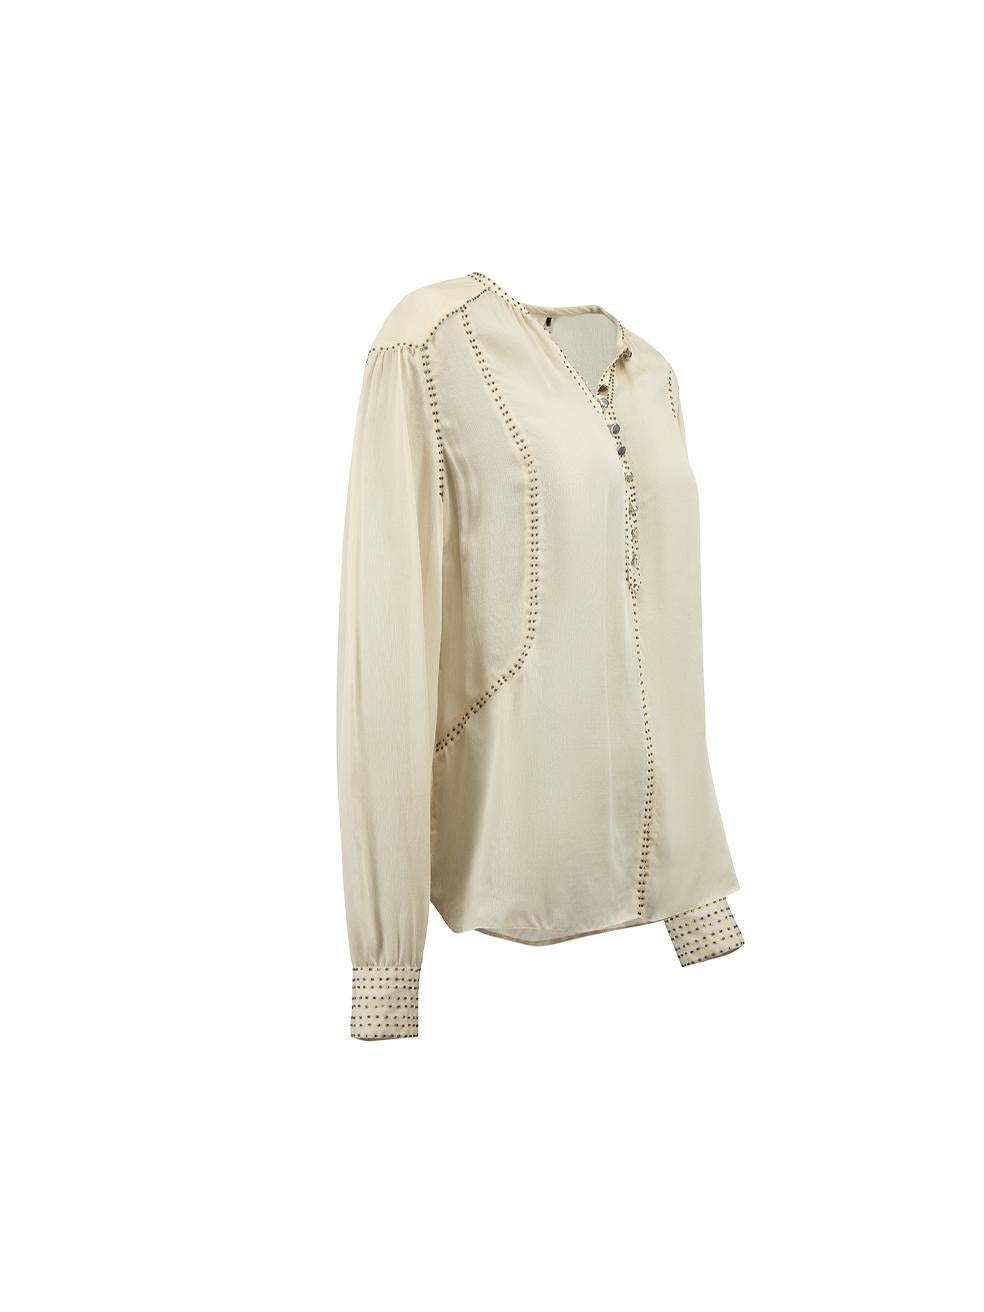 CONDITION is Very good. Minimal wear to top is evident. Minimal wear to the front and back with discoloured marks and pulls to the weave on this used Isabel Marant designer resale item. 



Details


Beige

Silk

Long sleeved